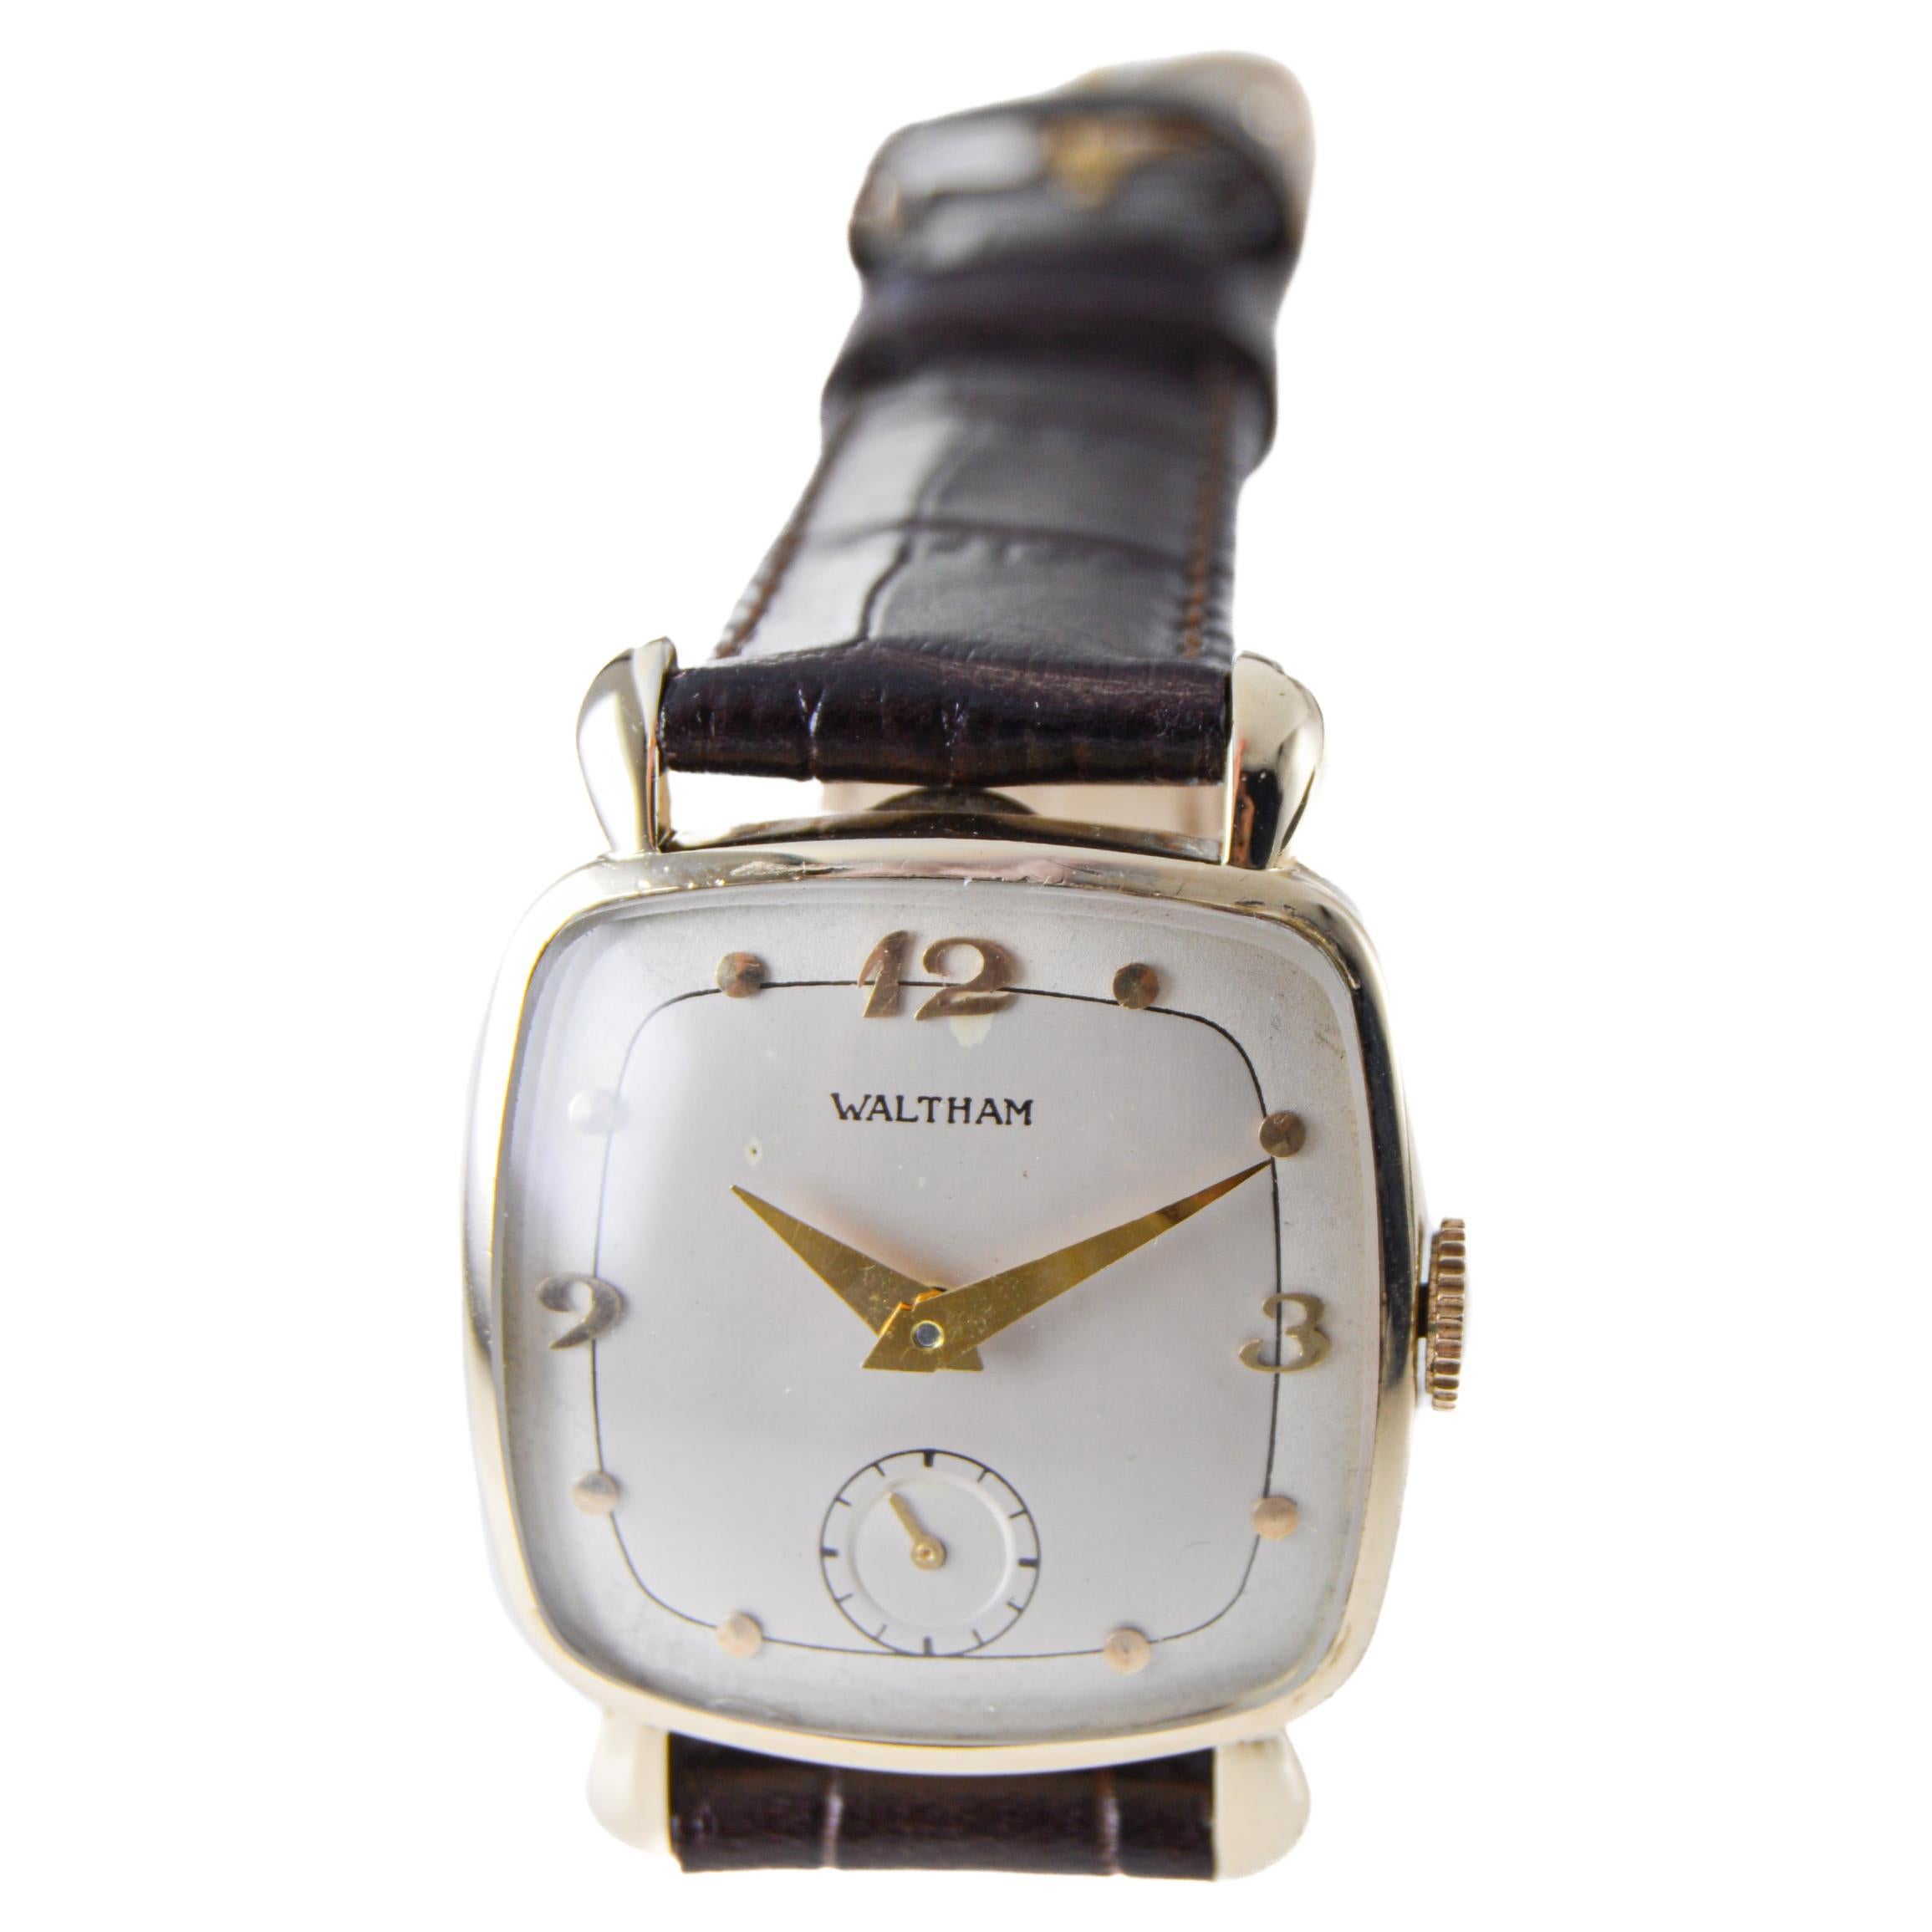 Waltham Gold Filled Art Deco Cushion Shaped Watch with Original Dial from 1940's For Sale 1